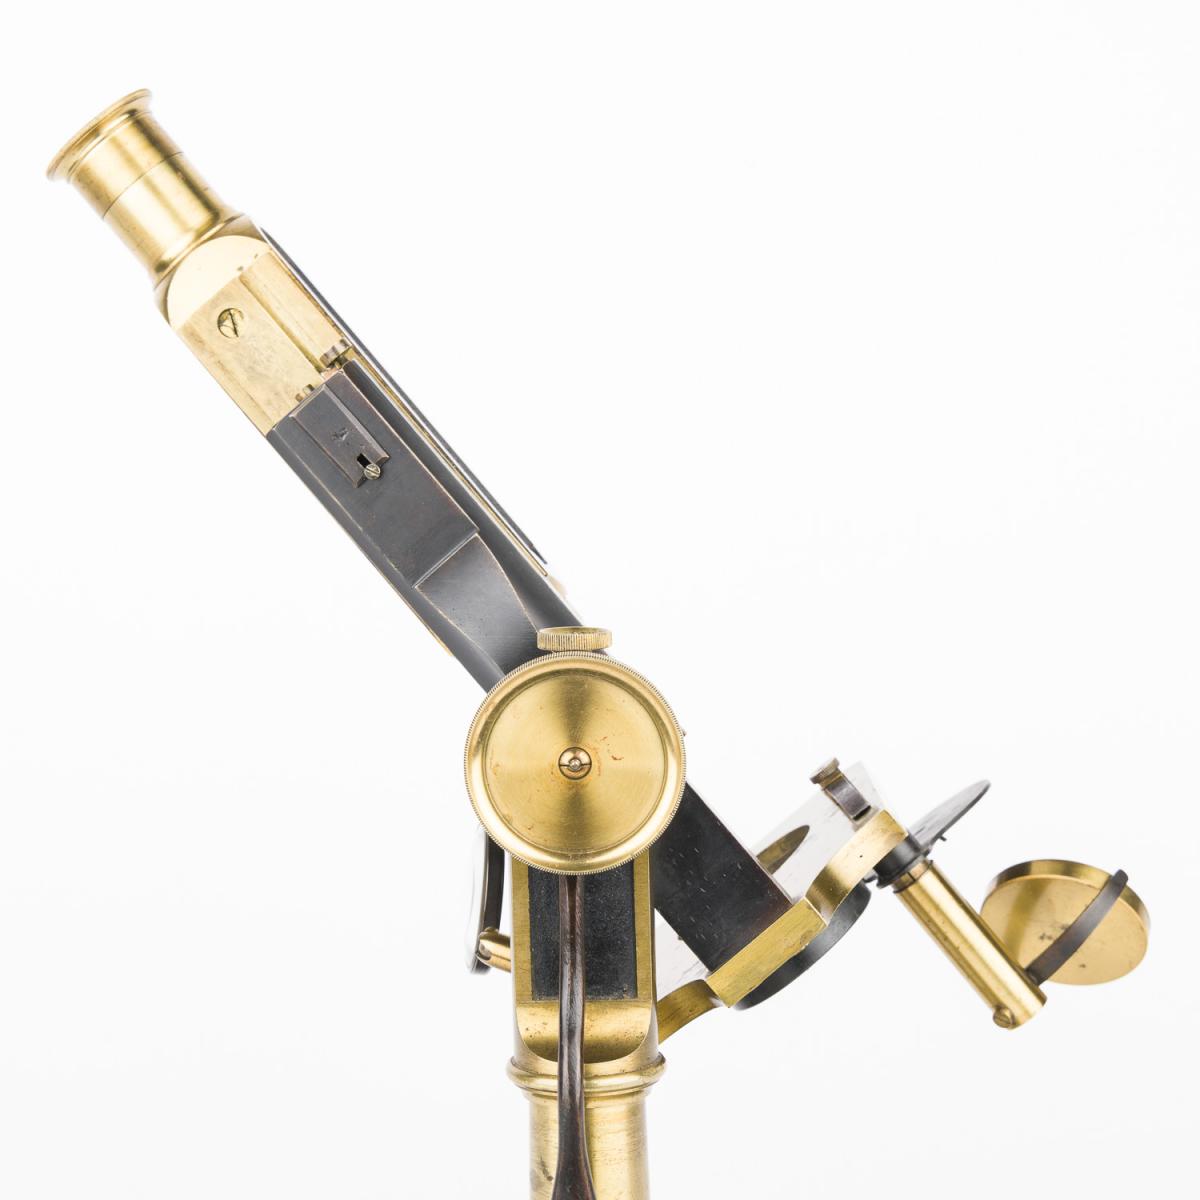 Universal Microscope by R & J Beck of London, 1867